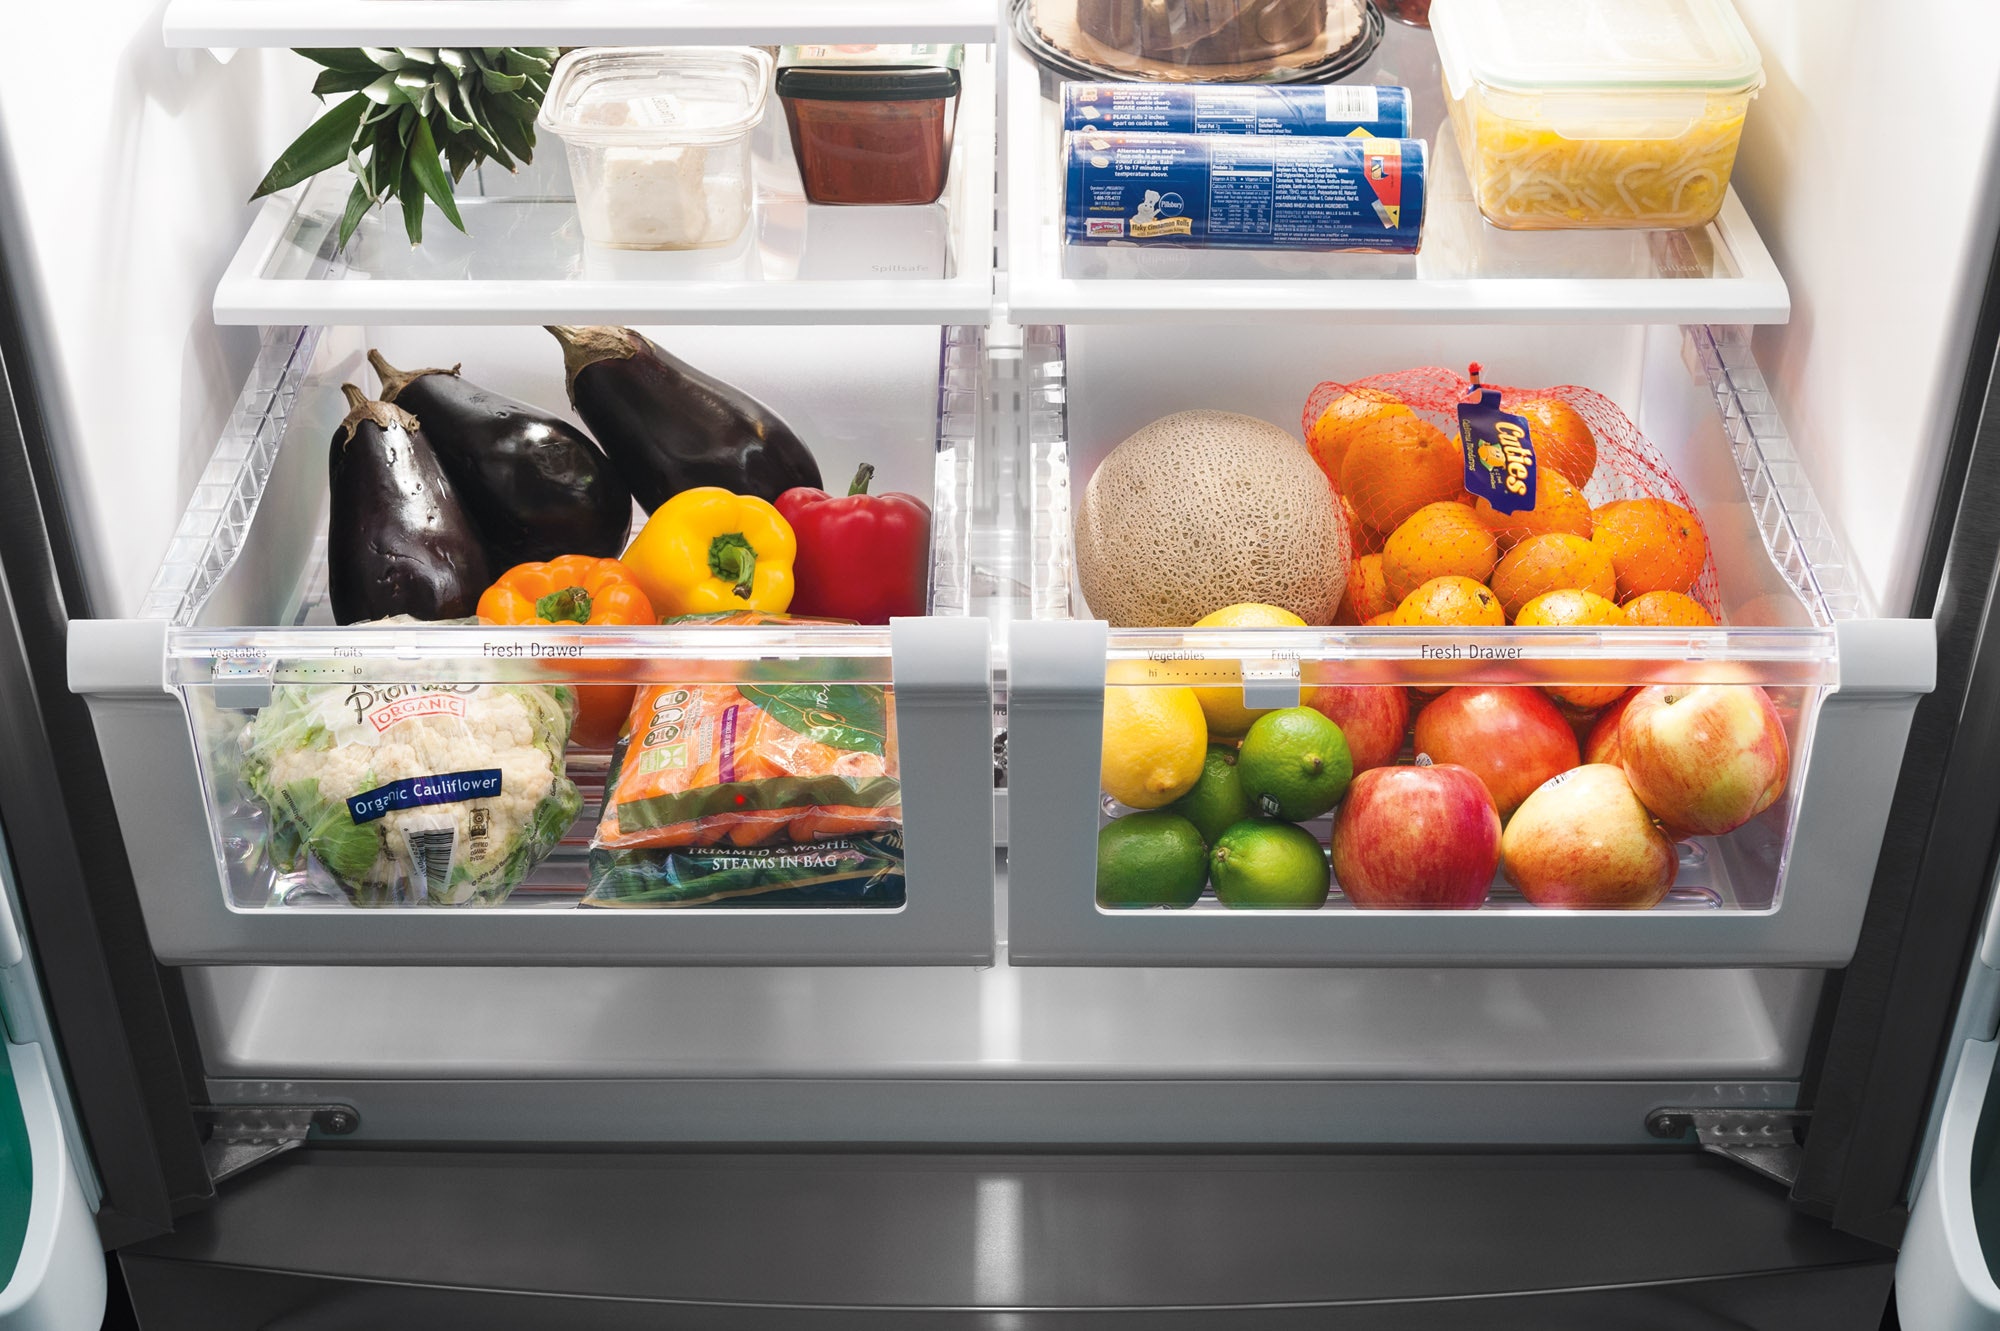 What Are the Different Compartments In My Fridge Used For and What Does the Crisper Do?